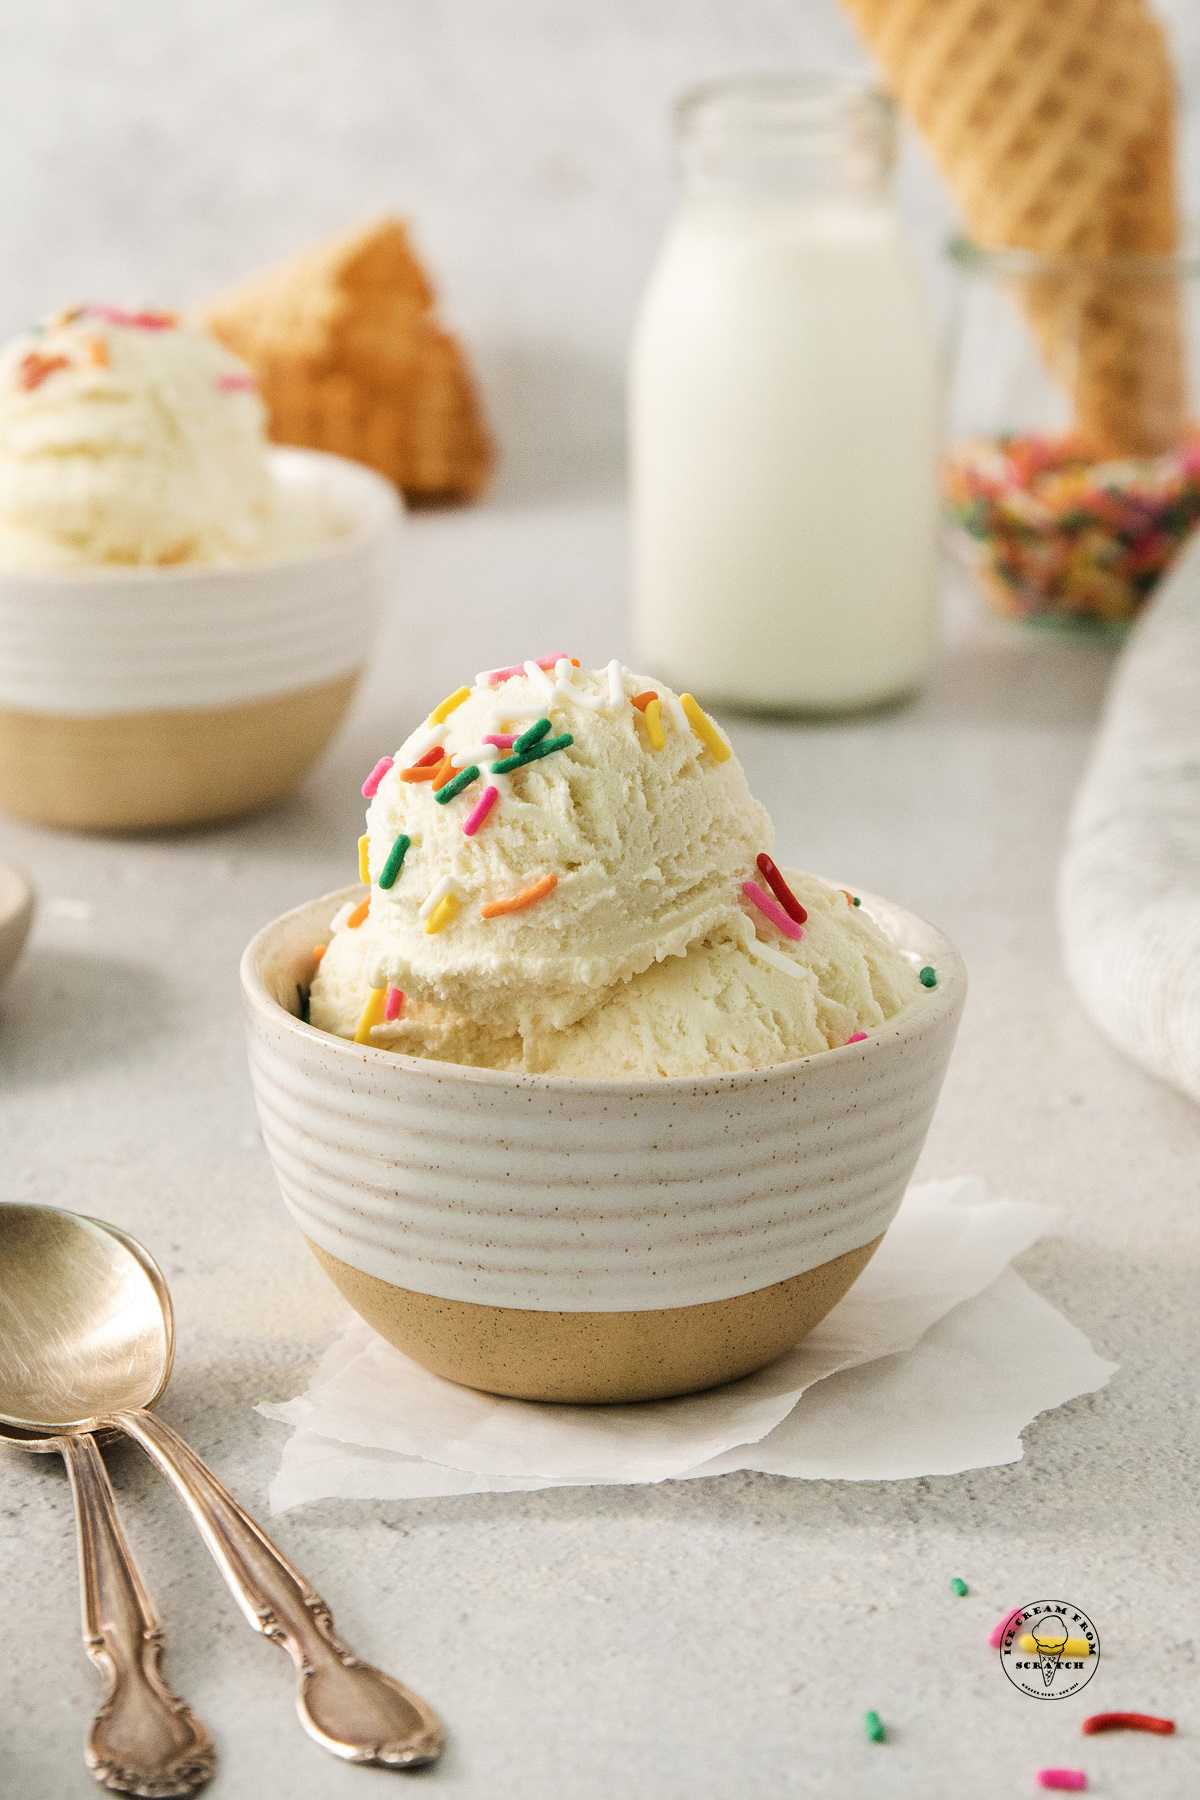 a ceramic bowl filled with scoops of cake batter ice cream, topped with rainbow sprinkles